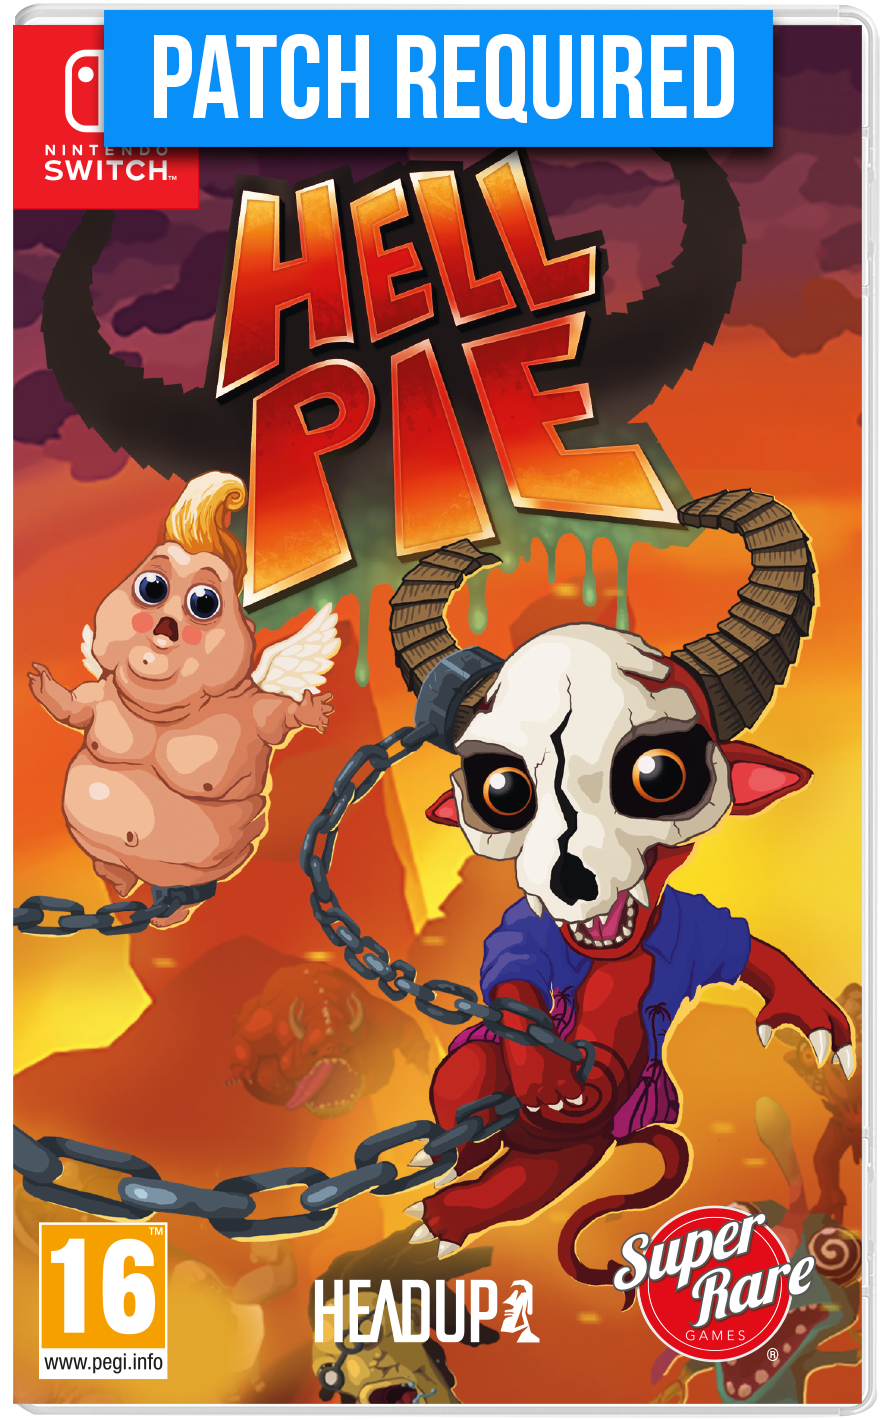 SRG#85: Hell Pie (Switch) (PATCH REQUIRED)